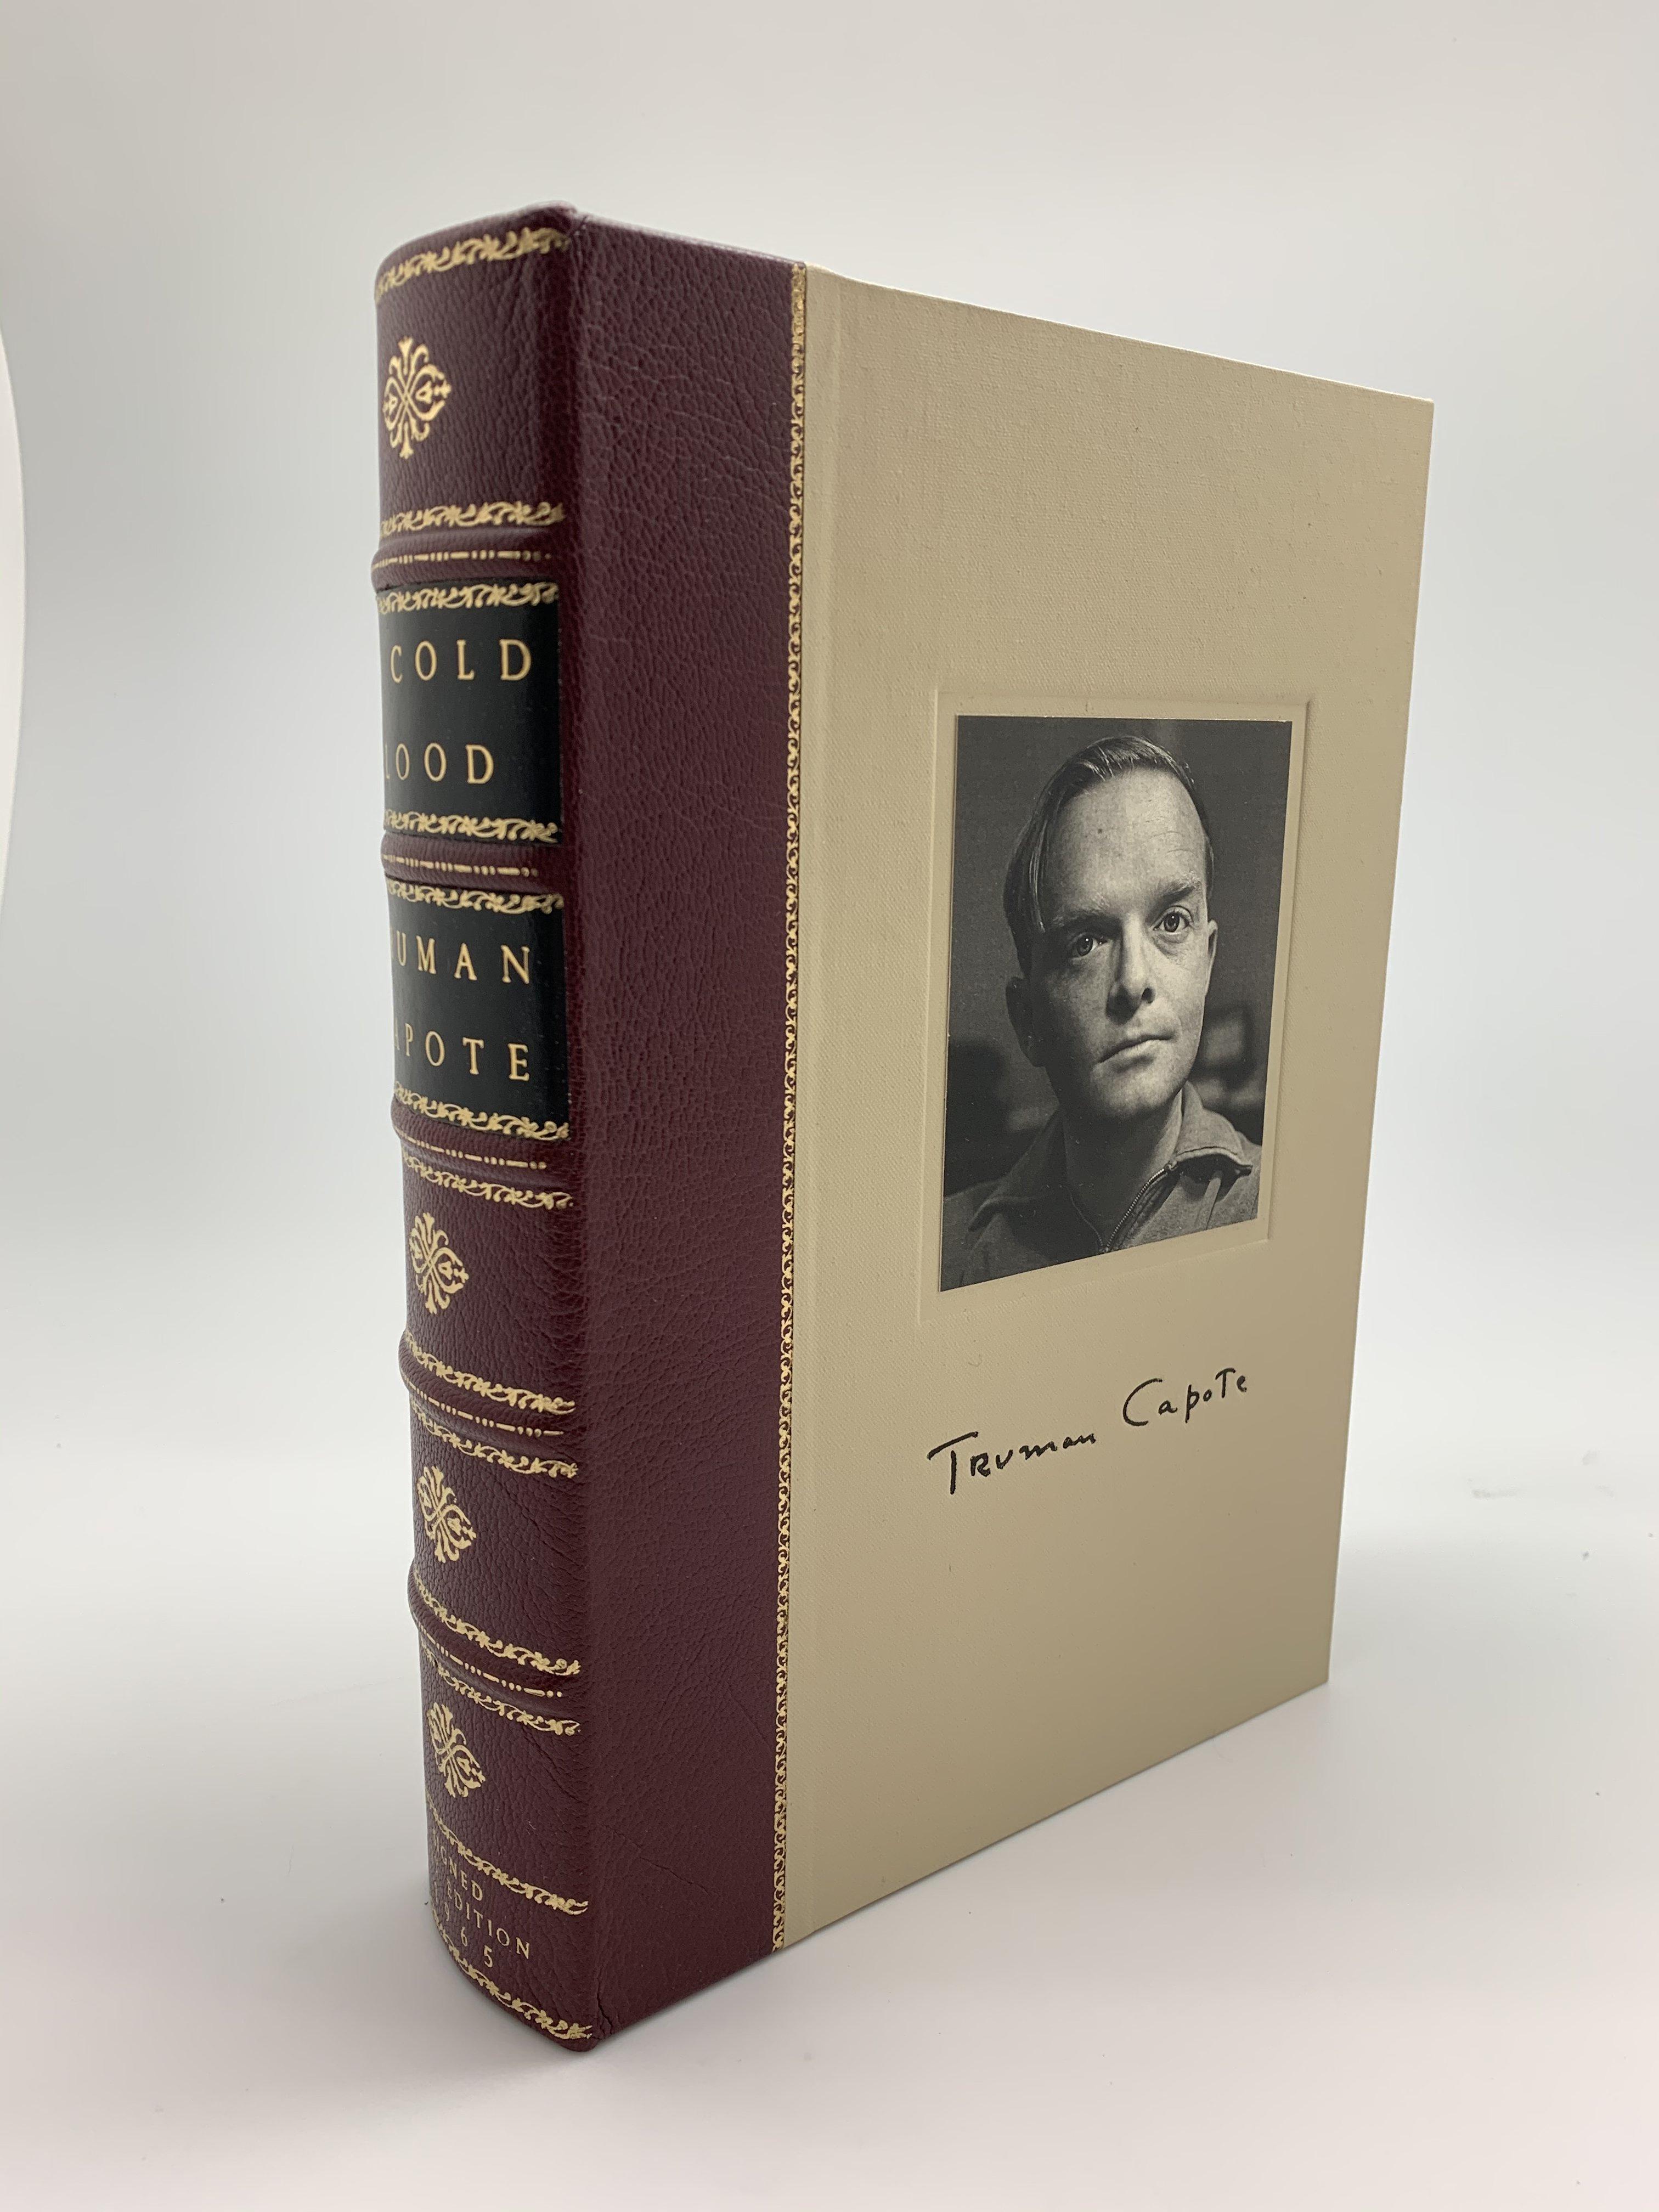 Capote, Truman, In Cold Blood. New York: Random House, Inc., 1965. First edition, first printing. Signed by Capote. Original dust jacket. Housed in a custom-built archival clamshell case. 

This is a signed first edition printing of In Cold Blood